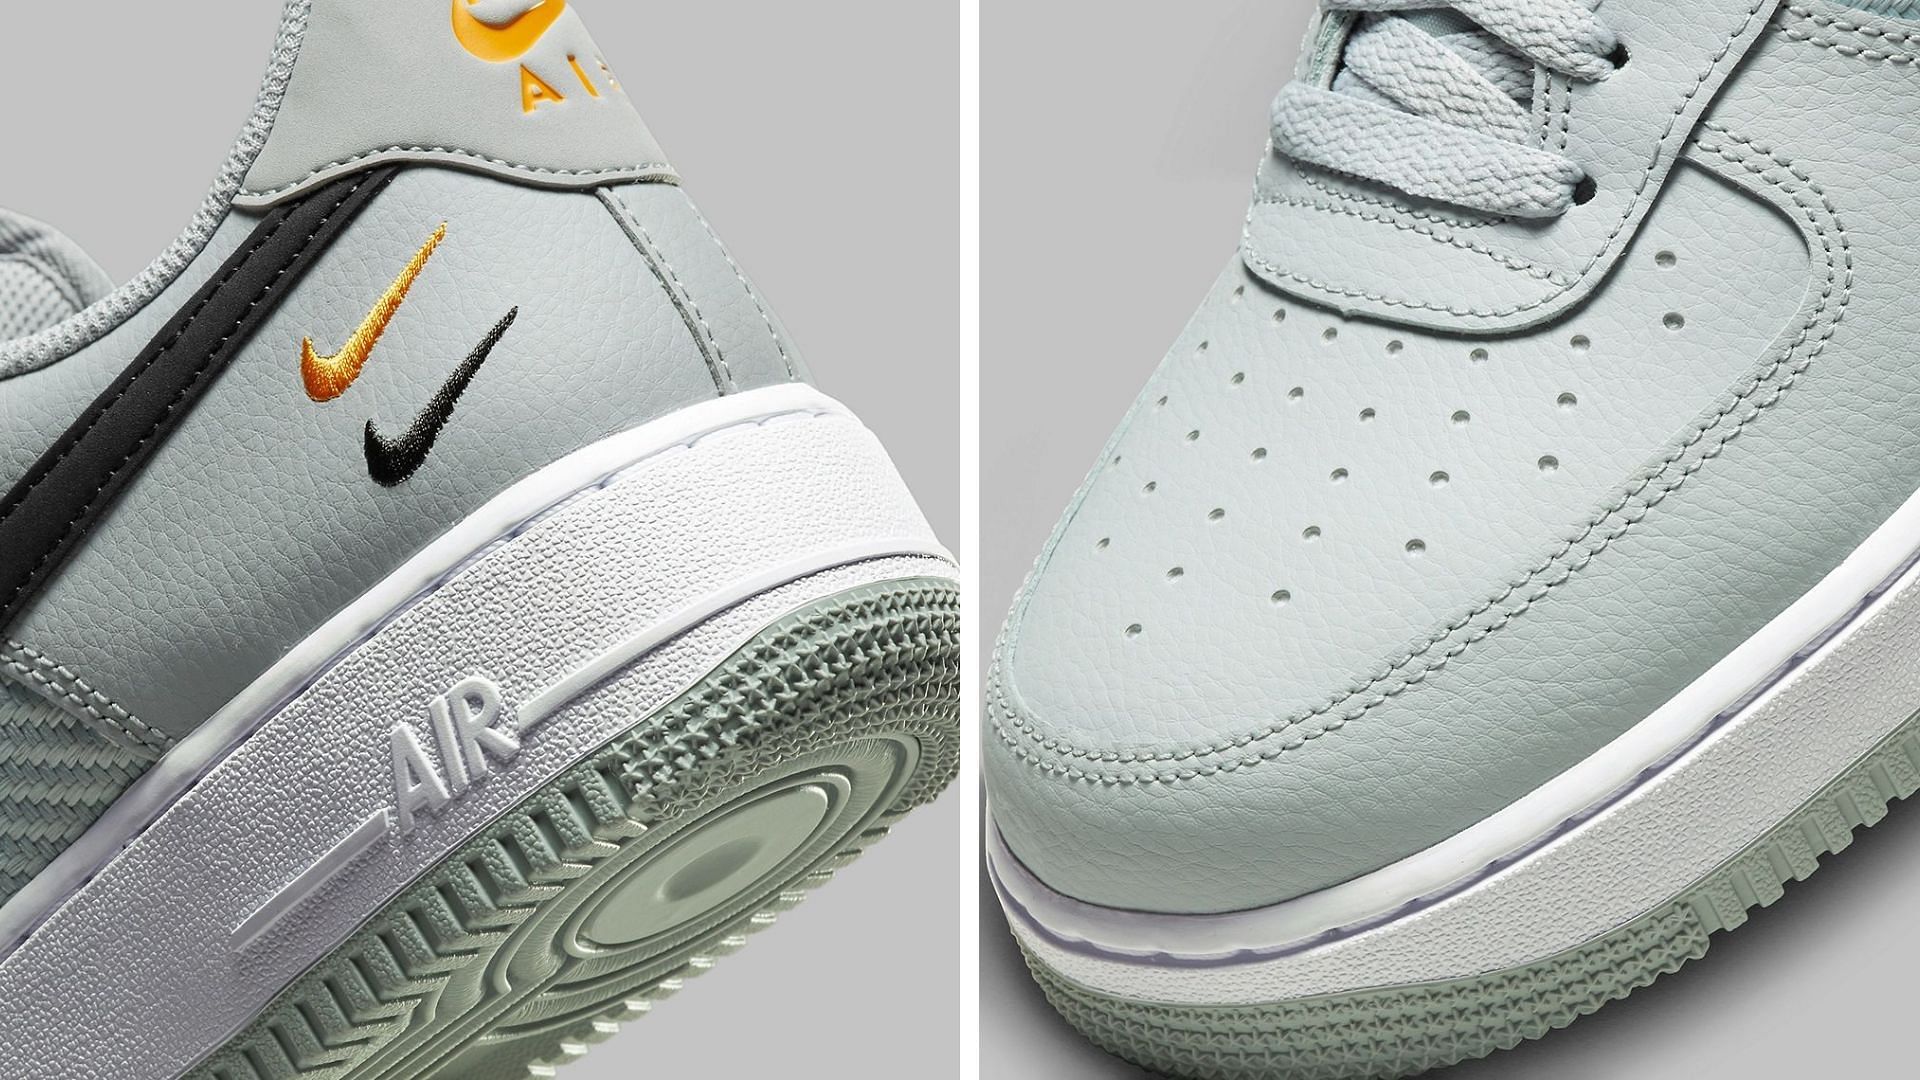 Take a closer at the heels and toe caps of the upcoming shoe (Image via Nike)